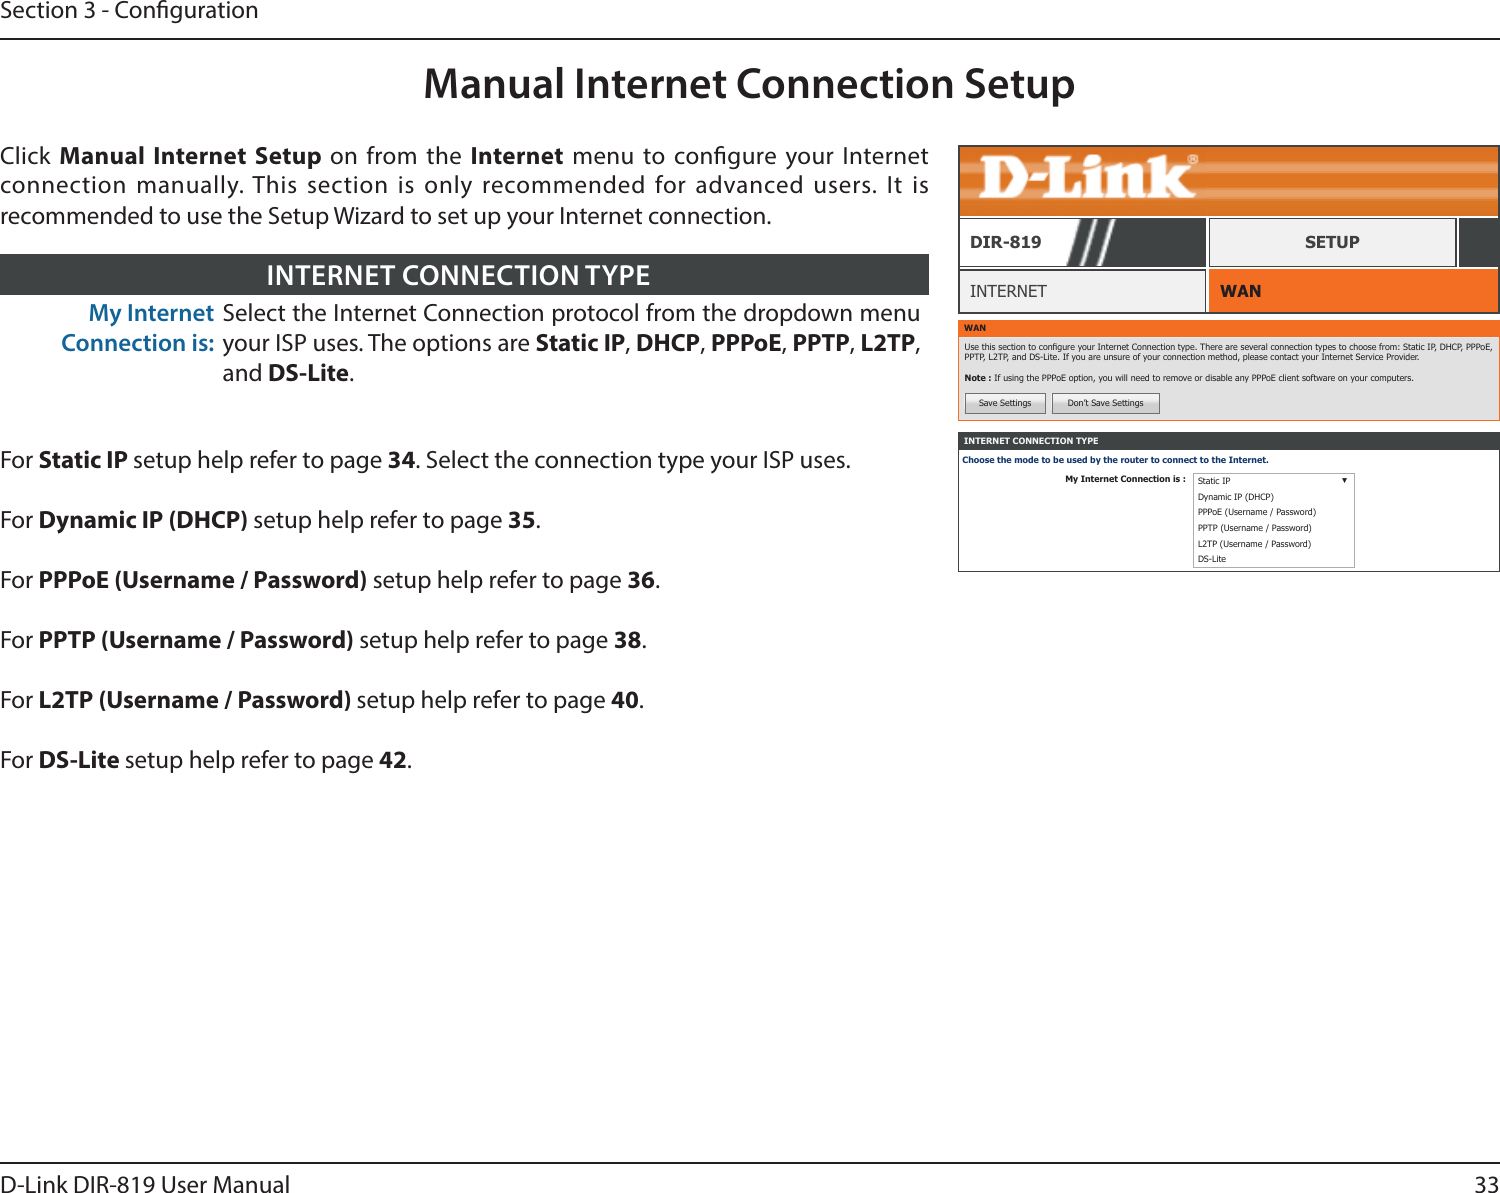 33D-Link DIR-819 User ManualSection 3 - CongurationManual Internet Connection SetupWANINTERNETDIR-819 SETUPWANUse this section to congure your Internet Connection type. There are several connection types to choose from: Static IP, DHCP, PPPoE, PPTP, L2TP, and DS-Lite. If you are unsure of your connection method, please contact your Internet Service Provider.Note : If using the PPPoE option, you will need to remove or disable any PPPoE client software on your computers.Save Settings Don’t Save SettingsINTERNET CONNECTION TYPEChoose the mode to be used by the router to connect to the Internet.My Internet Connection is : Static IP ▼Dynamic IP (DHCP)PPPoE (Username / Password)PPTP (Username / Password)L2TP (Username / Password)DS-LiteClick  Manual Internet Setup on from the Internet menu to congure your Internet connection manually. This section is only recommended for advanced users. It is recommended to use the Setup Wizard to set up your Internet connection.My Internet Connection is:Select the Internet Connection protocol from the dropdown menu your ISP uses. The options are Static IP, DHCP, PPPoE, PPTP, L2TP, and DS-Lite.INTERNET CONNECTION TYPEFor Static IP setup help refer to page 34. Select the connection type your ISP uses.For Dynamic IP (DHCP) setup help refer to page 35.For PPPoE (Username / Password) setup help refer to page 36.For PPTP (Username / Password) setup help refer to page 38.For L2TP (Username / Password) setup help refer to page 40.For DS-Lite setup help refer to page 42.